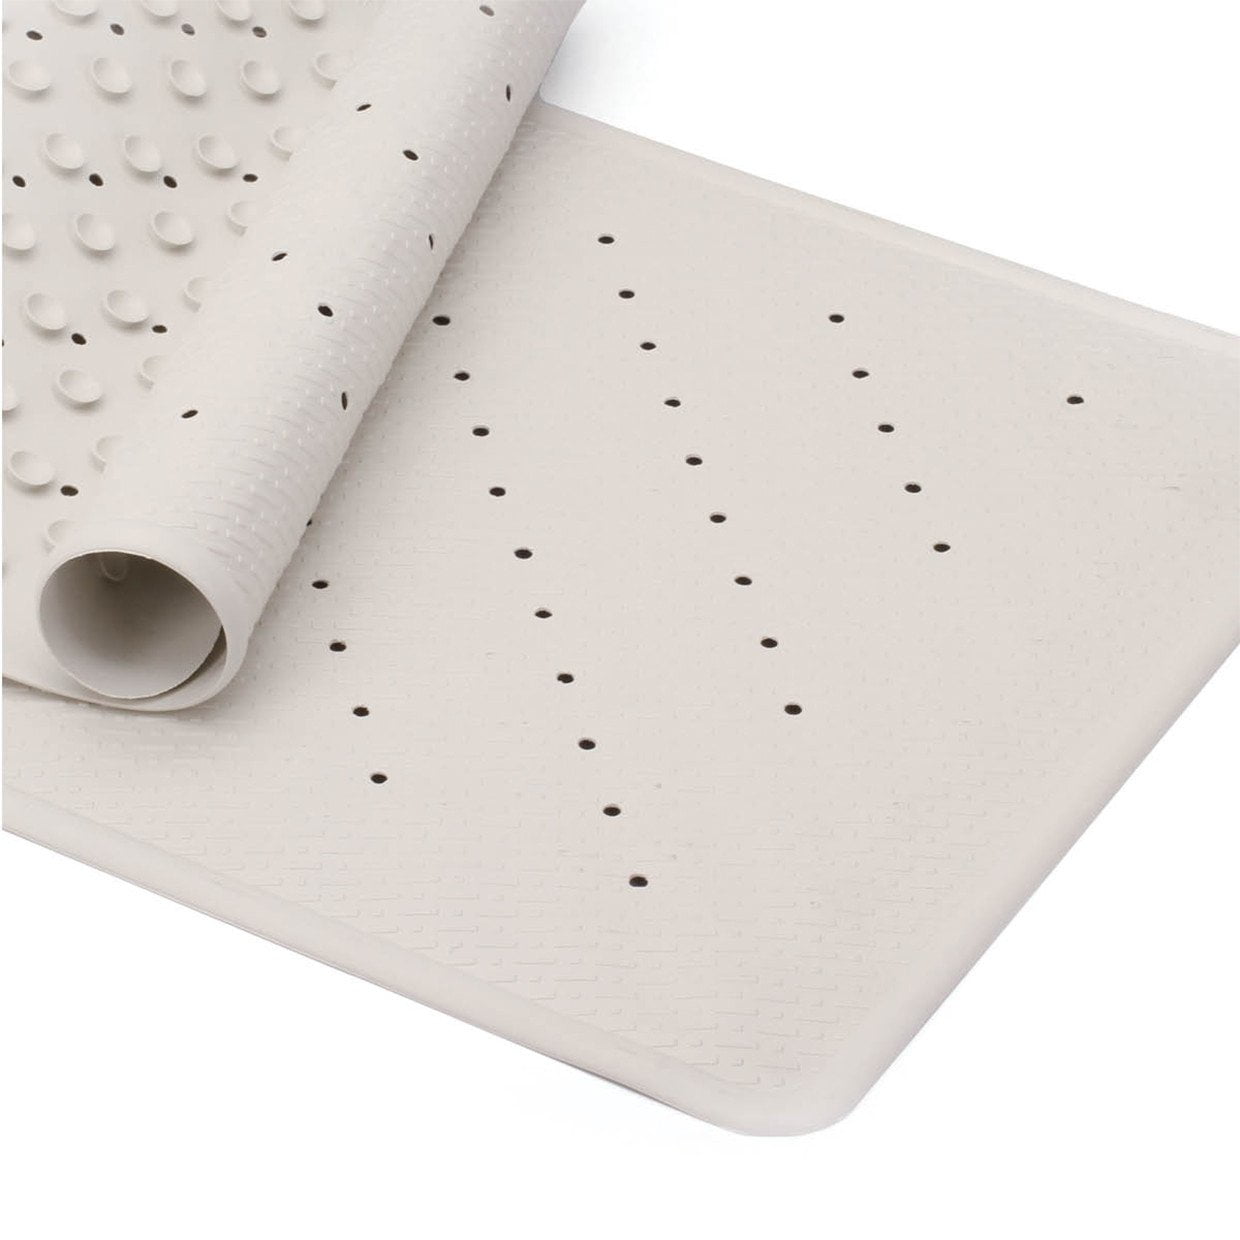 Pvc Shower Mat With High Grip Suction Cups 70 X 35 Cm GjbCDWGLA Undersea Cobblestone Dolphin Non Slip Safety Bath Mat For Shower 